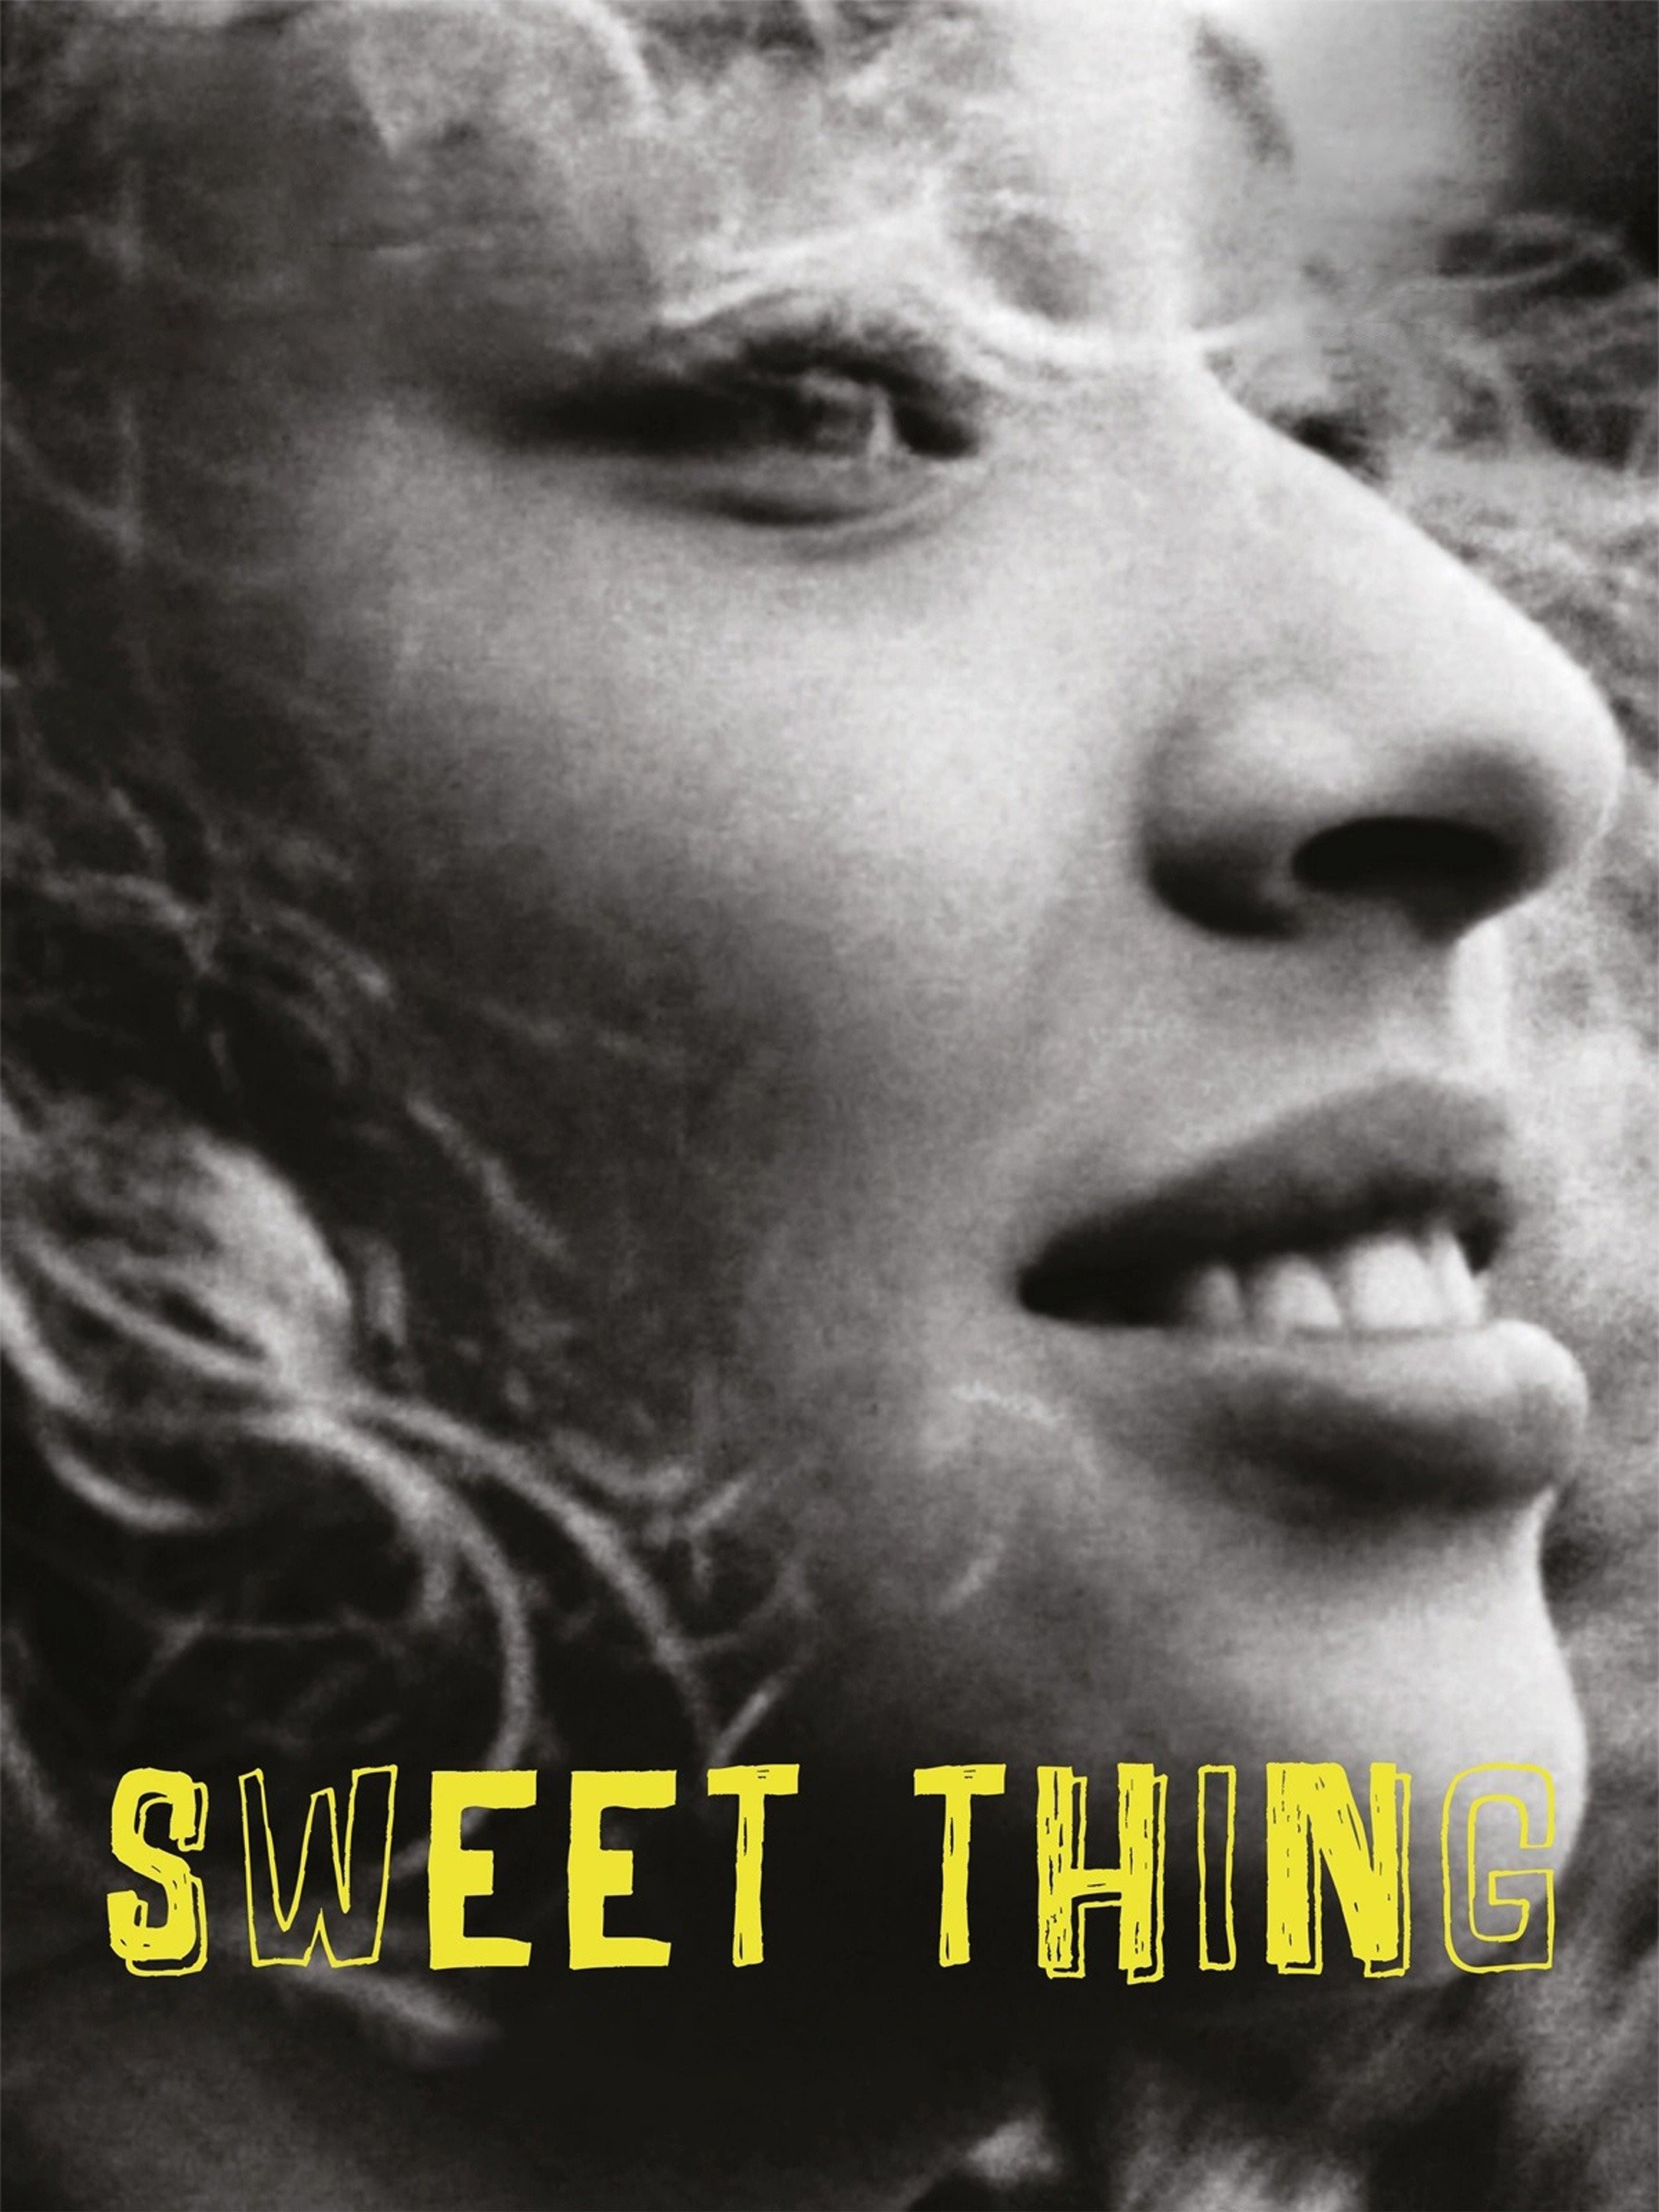 The Sweetest Thing - Rotten Tomatoes